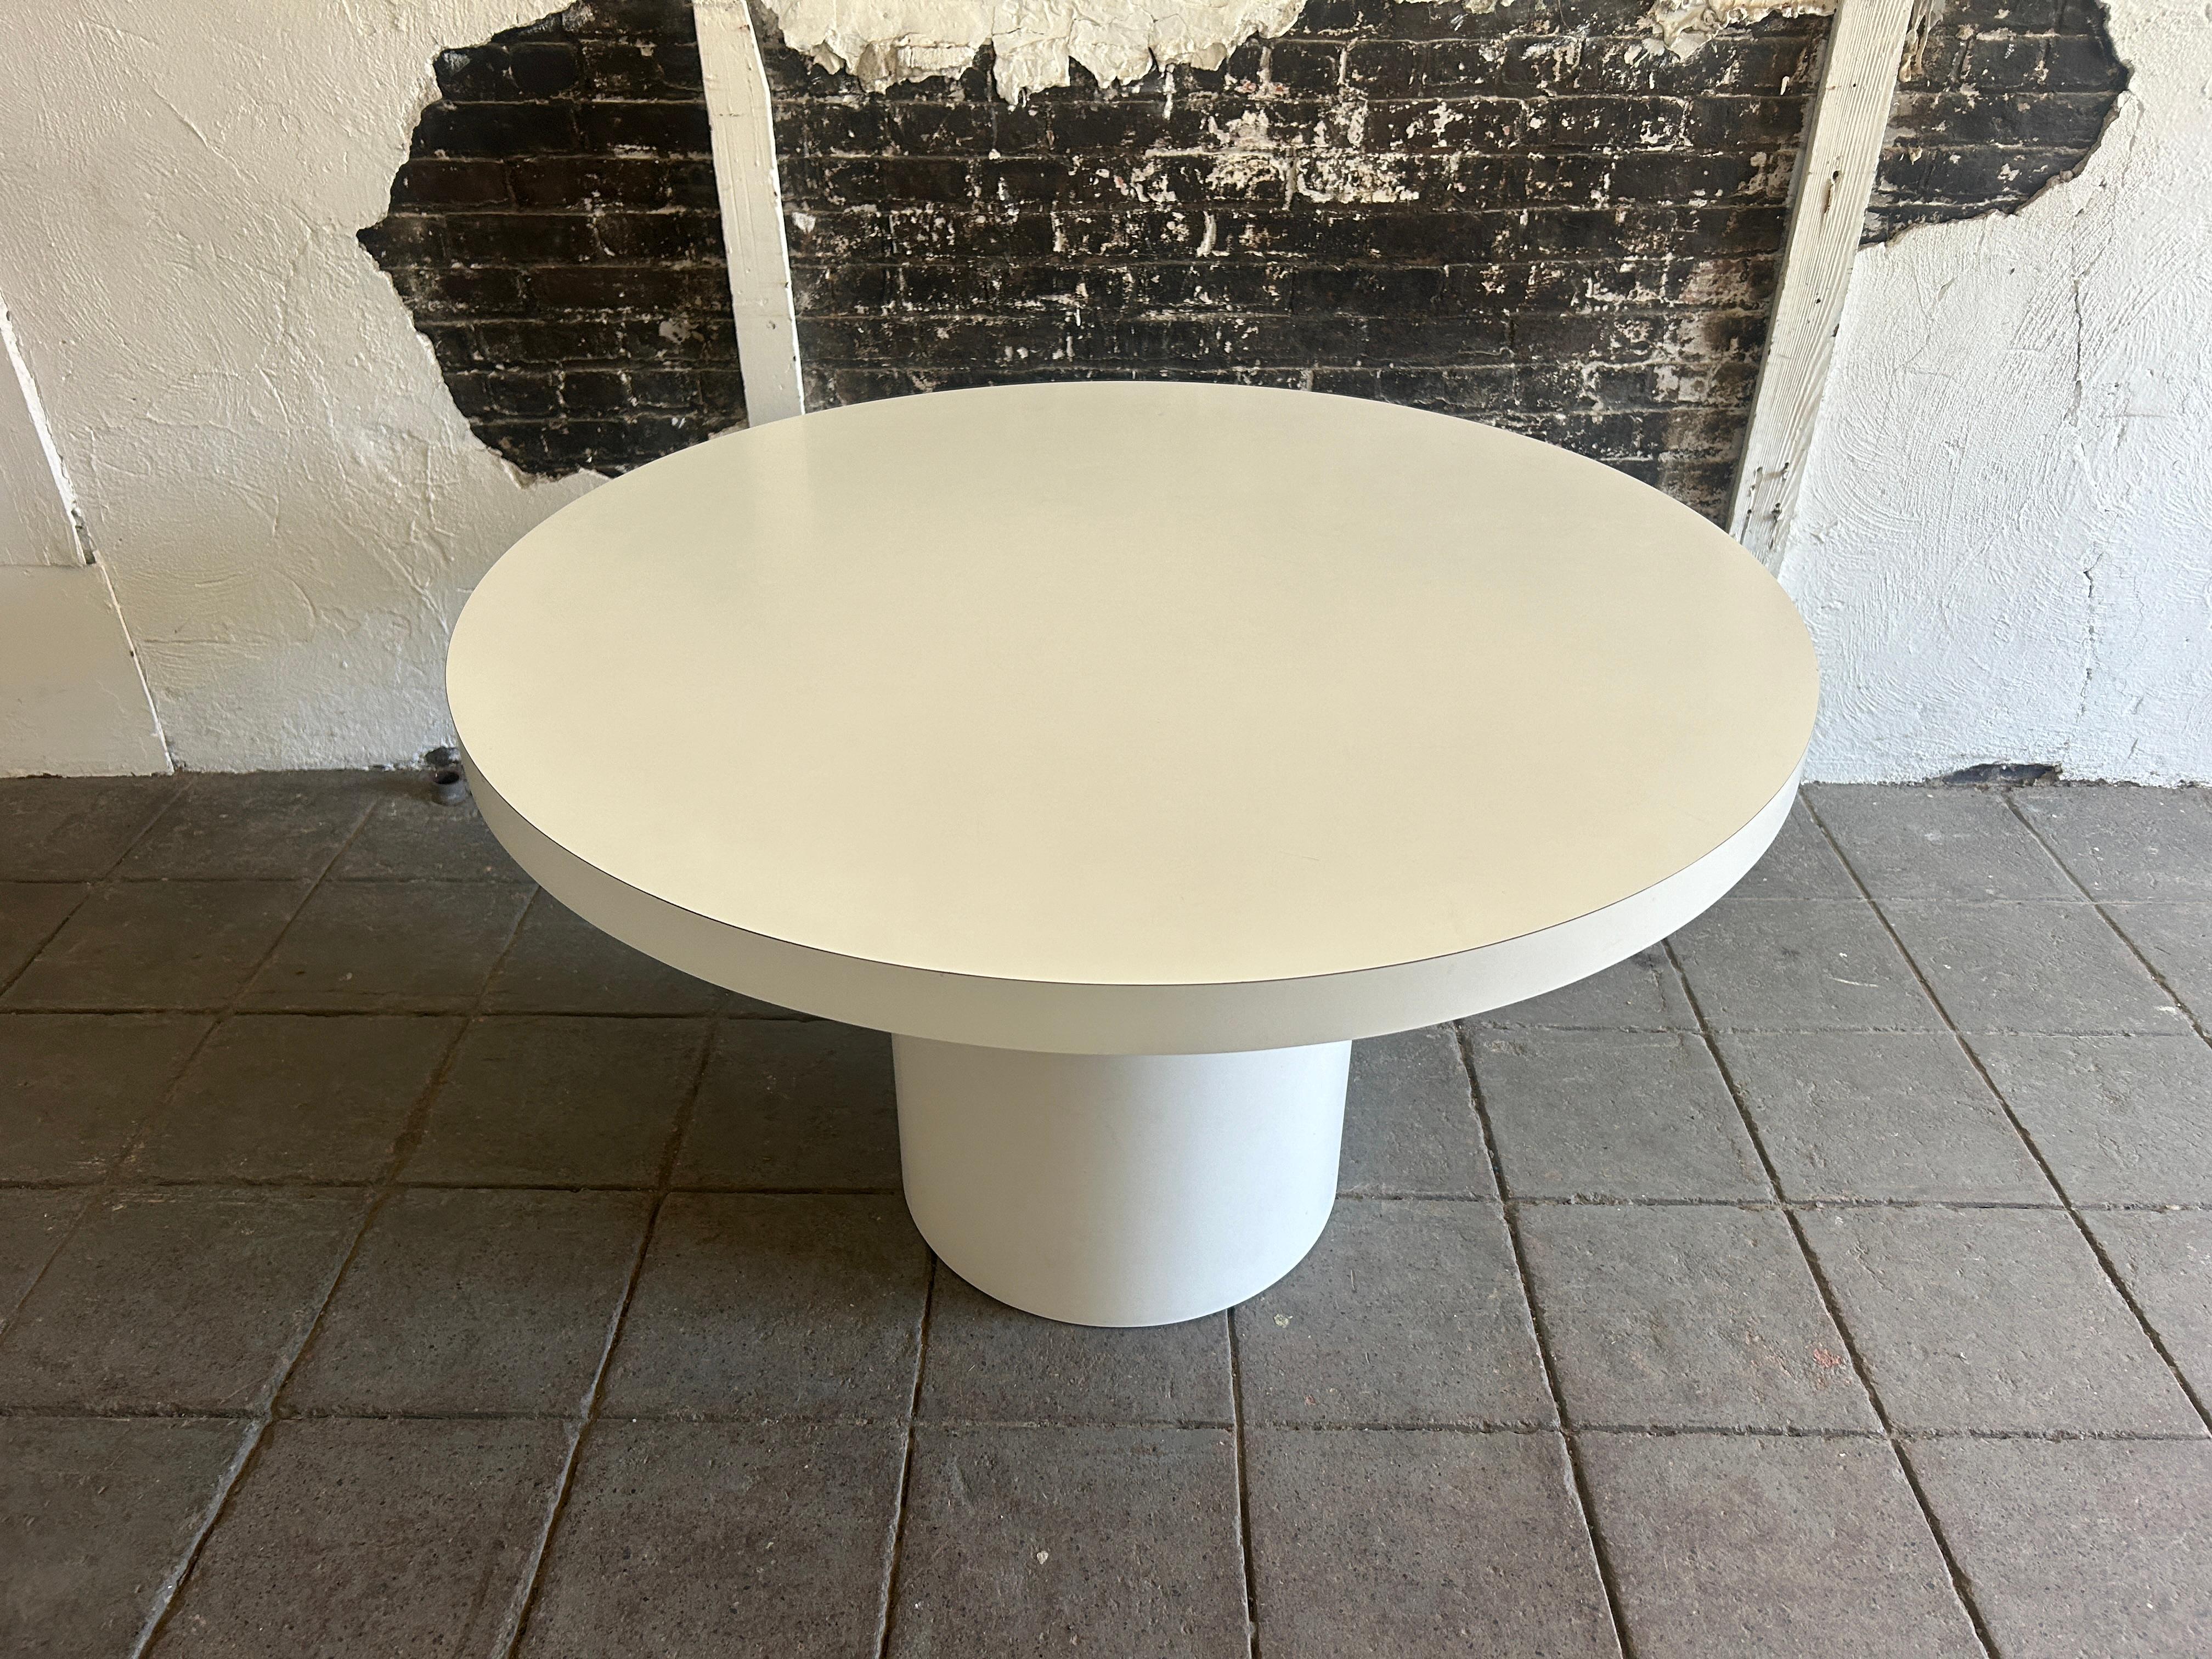 Simple Post Modern white Laminate round dining table. white Laminate with white round base. No Chips very clean. Round top and round base. Made circa 1980s Located in Brooklyn NYC.

Measures 48